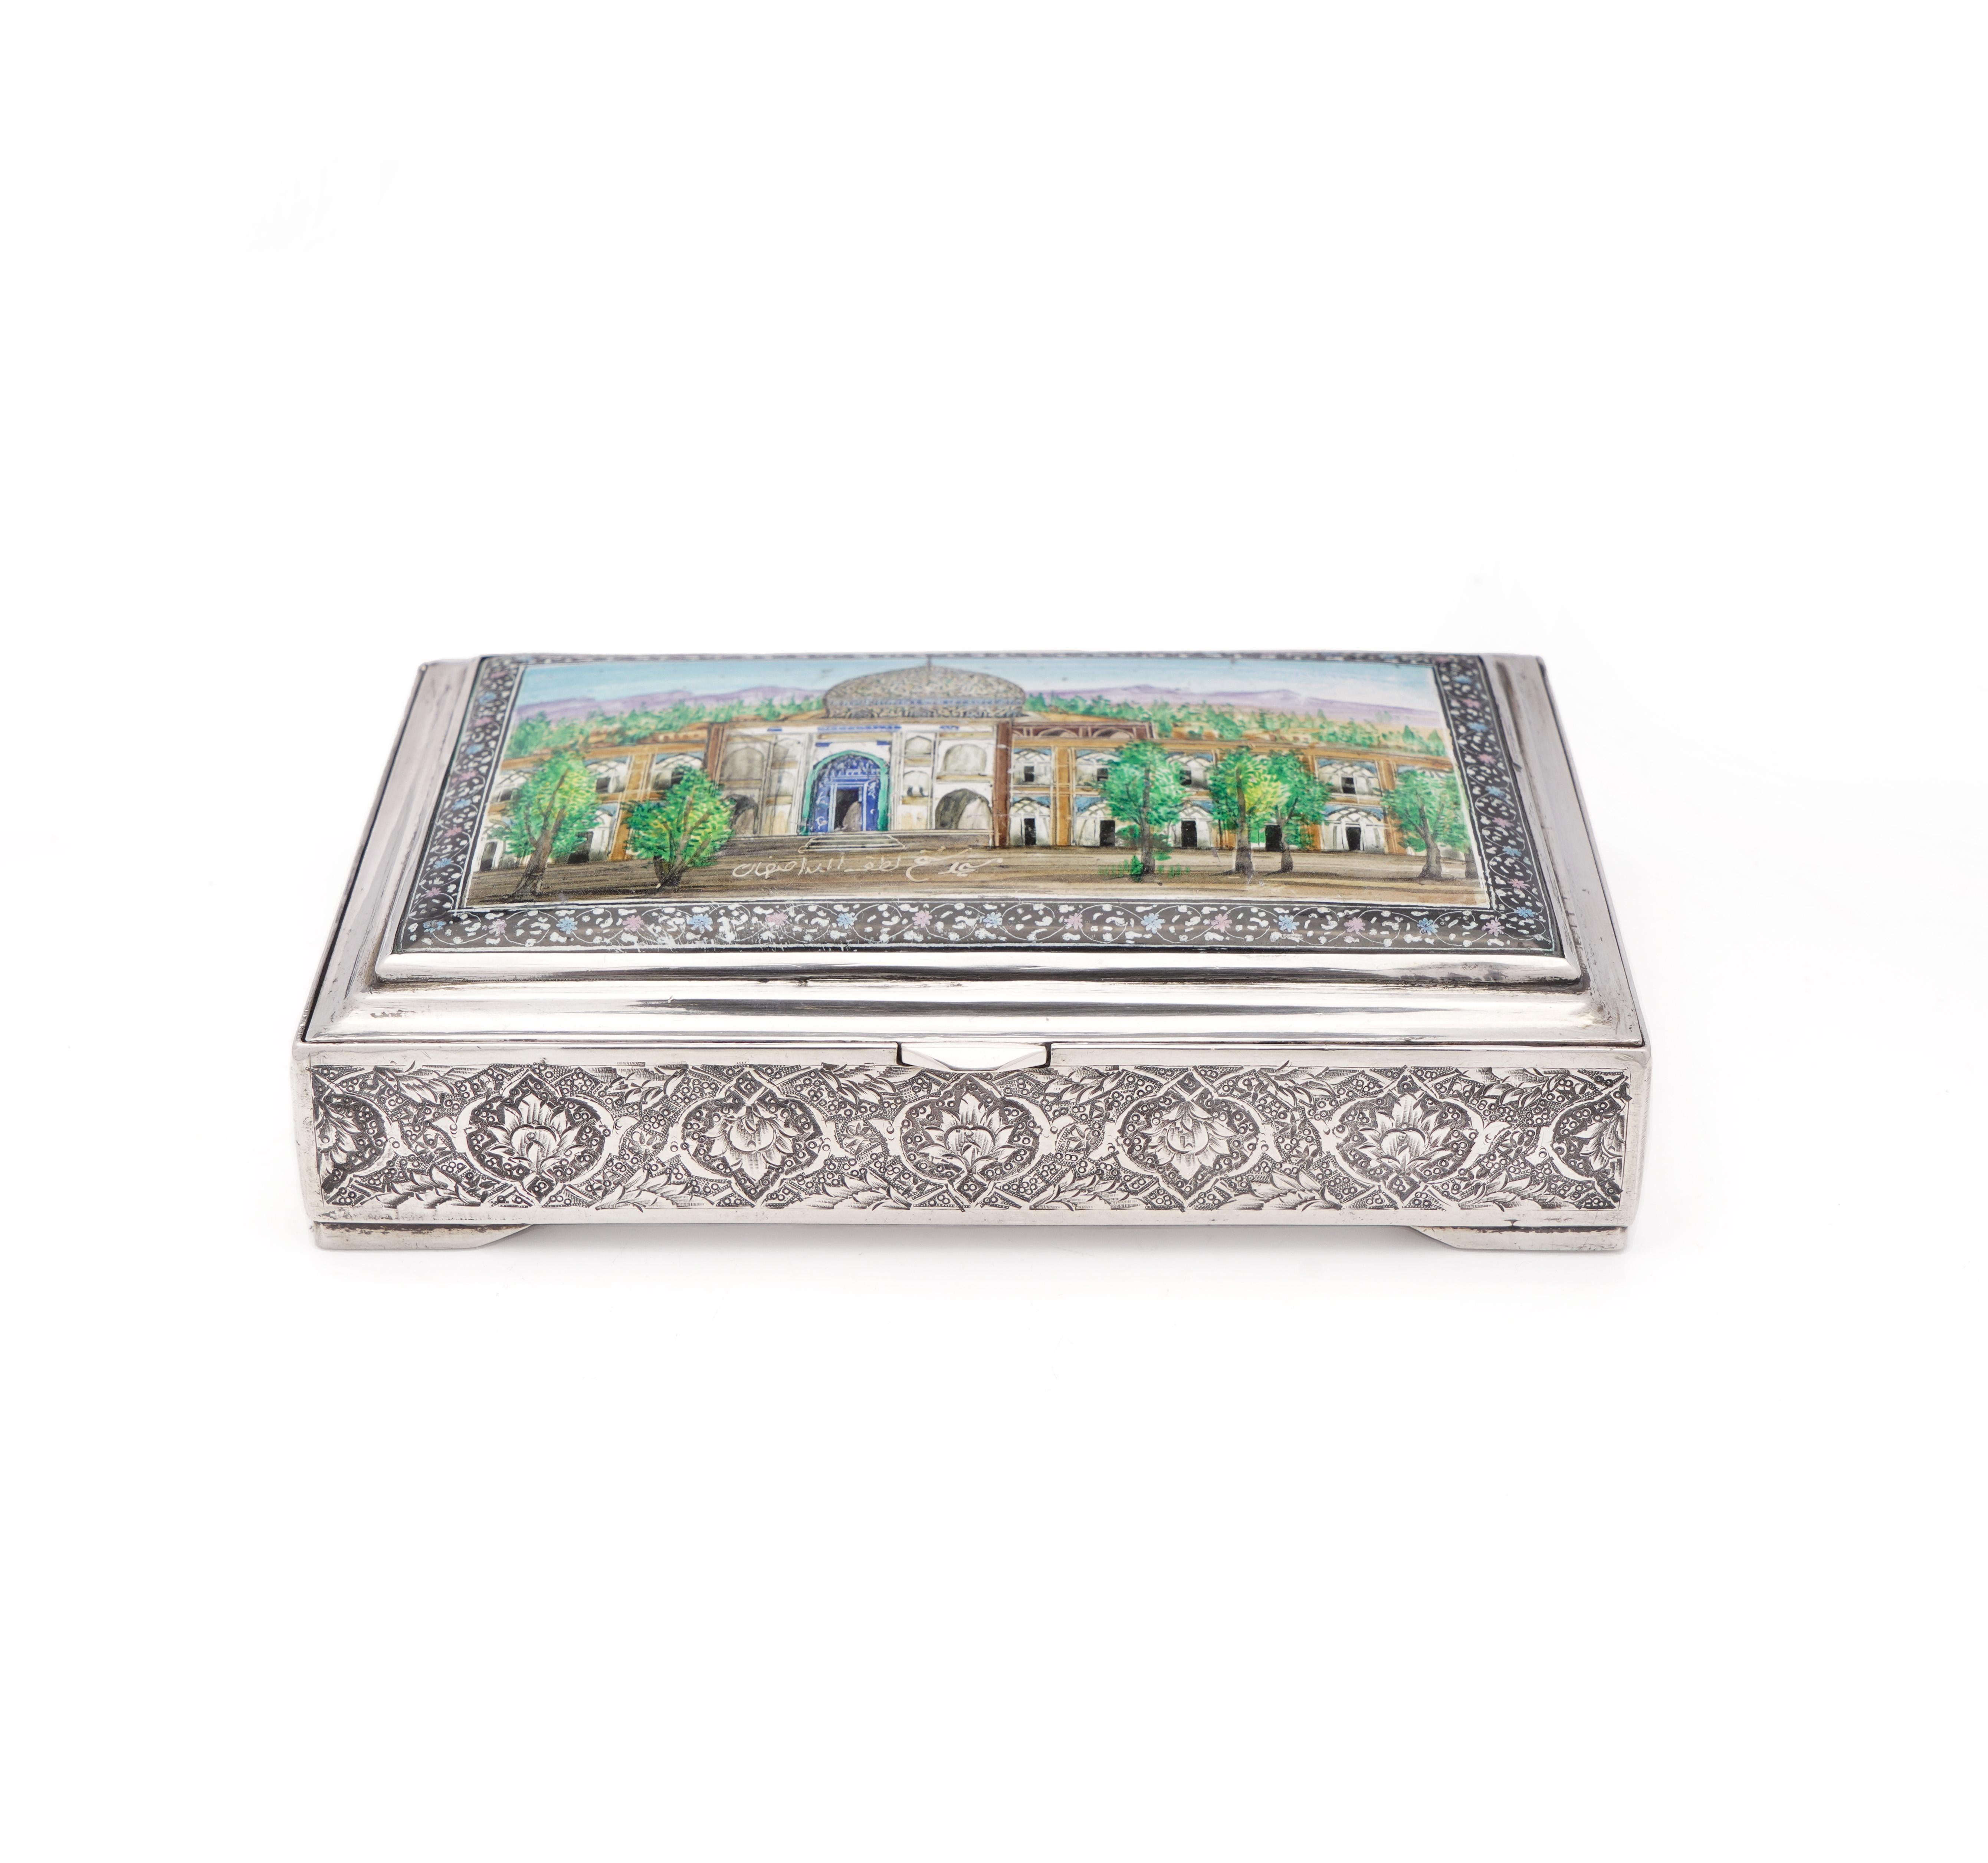 An exquisite vintage Persian/Iranian 84 silver and enamel box adorned with a cap For Sale 2